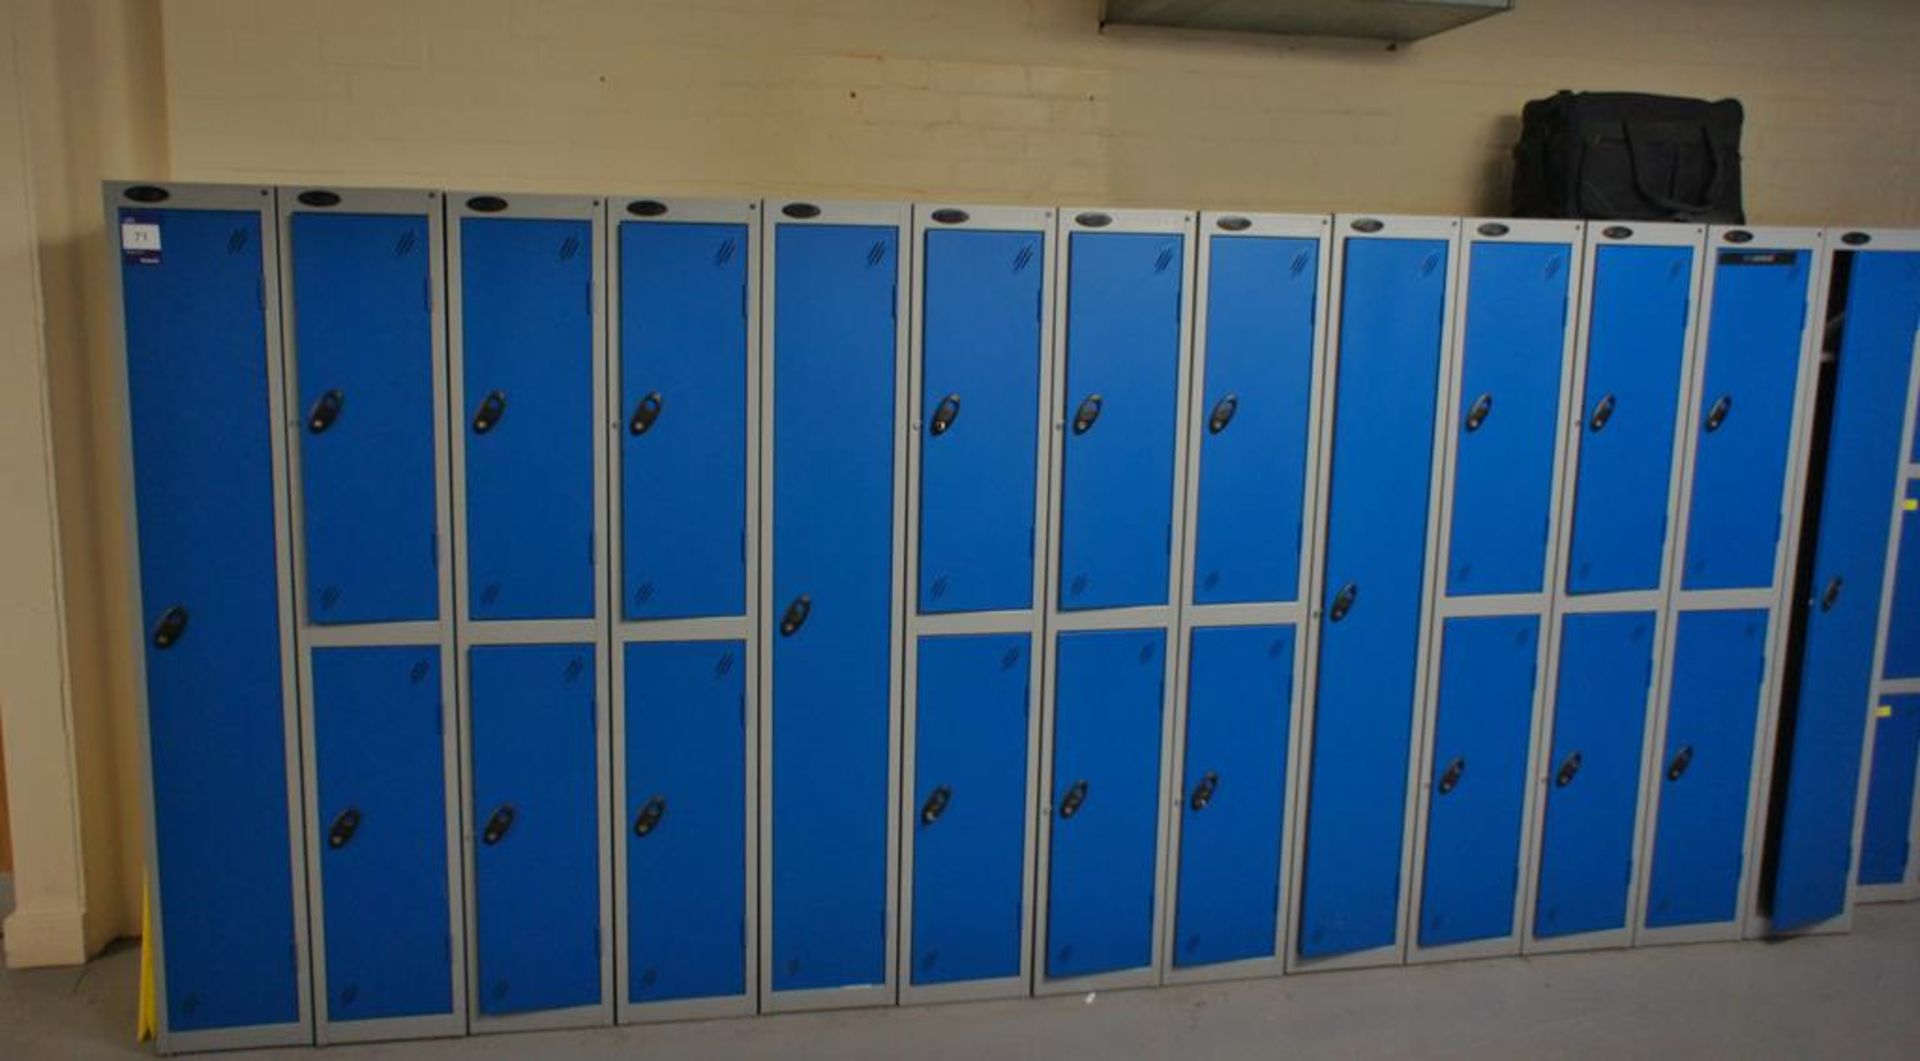 * 13 Units Probe Steel Personel Lockers, Blue Photographs are provided for example purposes only and